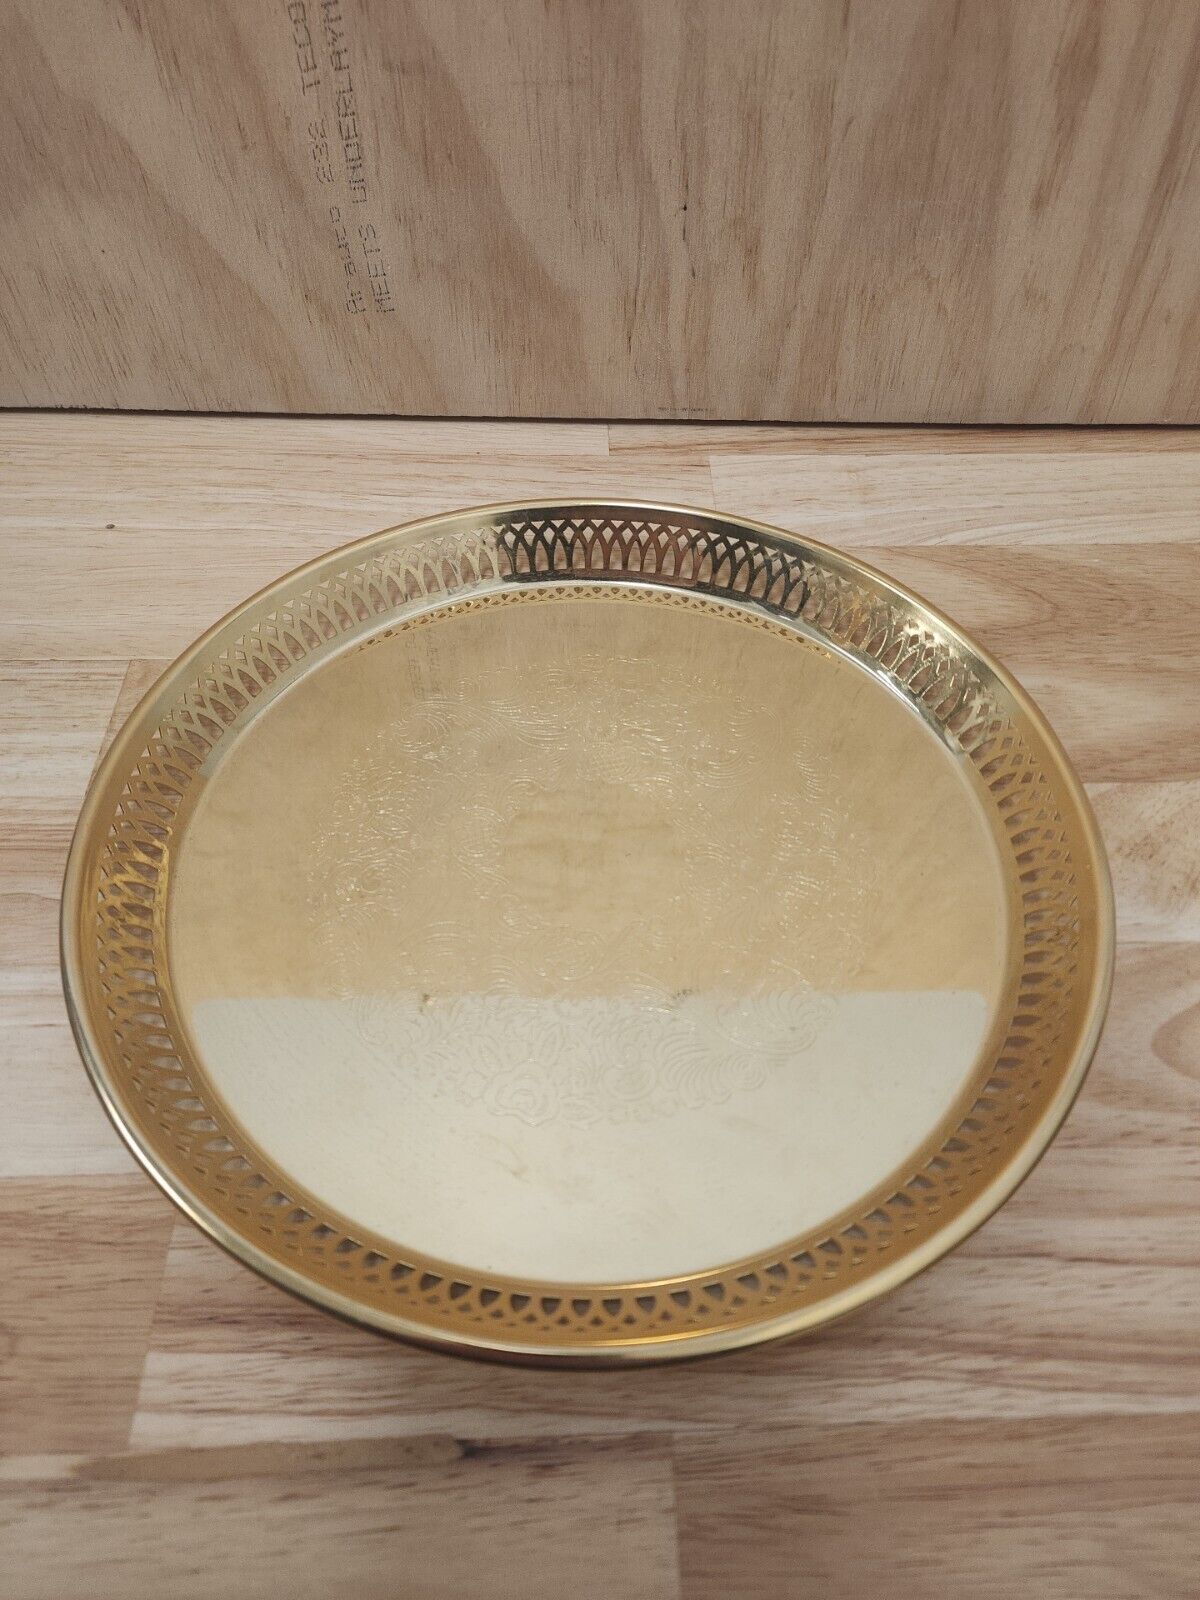 Vintage Scandia Guld 24 K Gold Plated Round Serving Tray Etched Fine